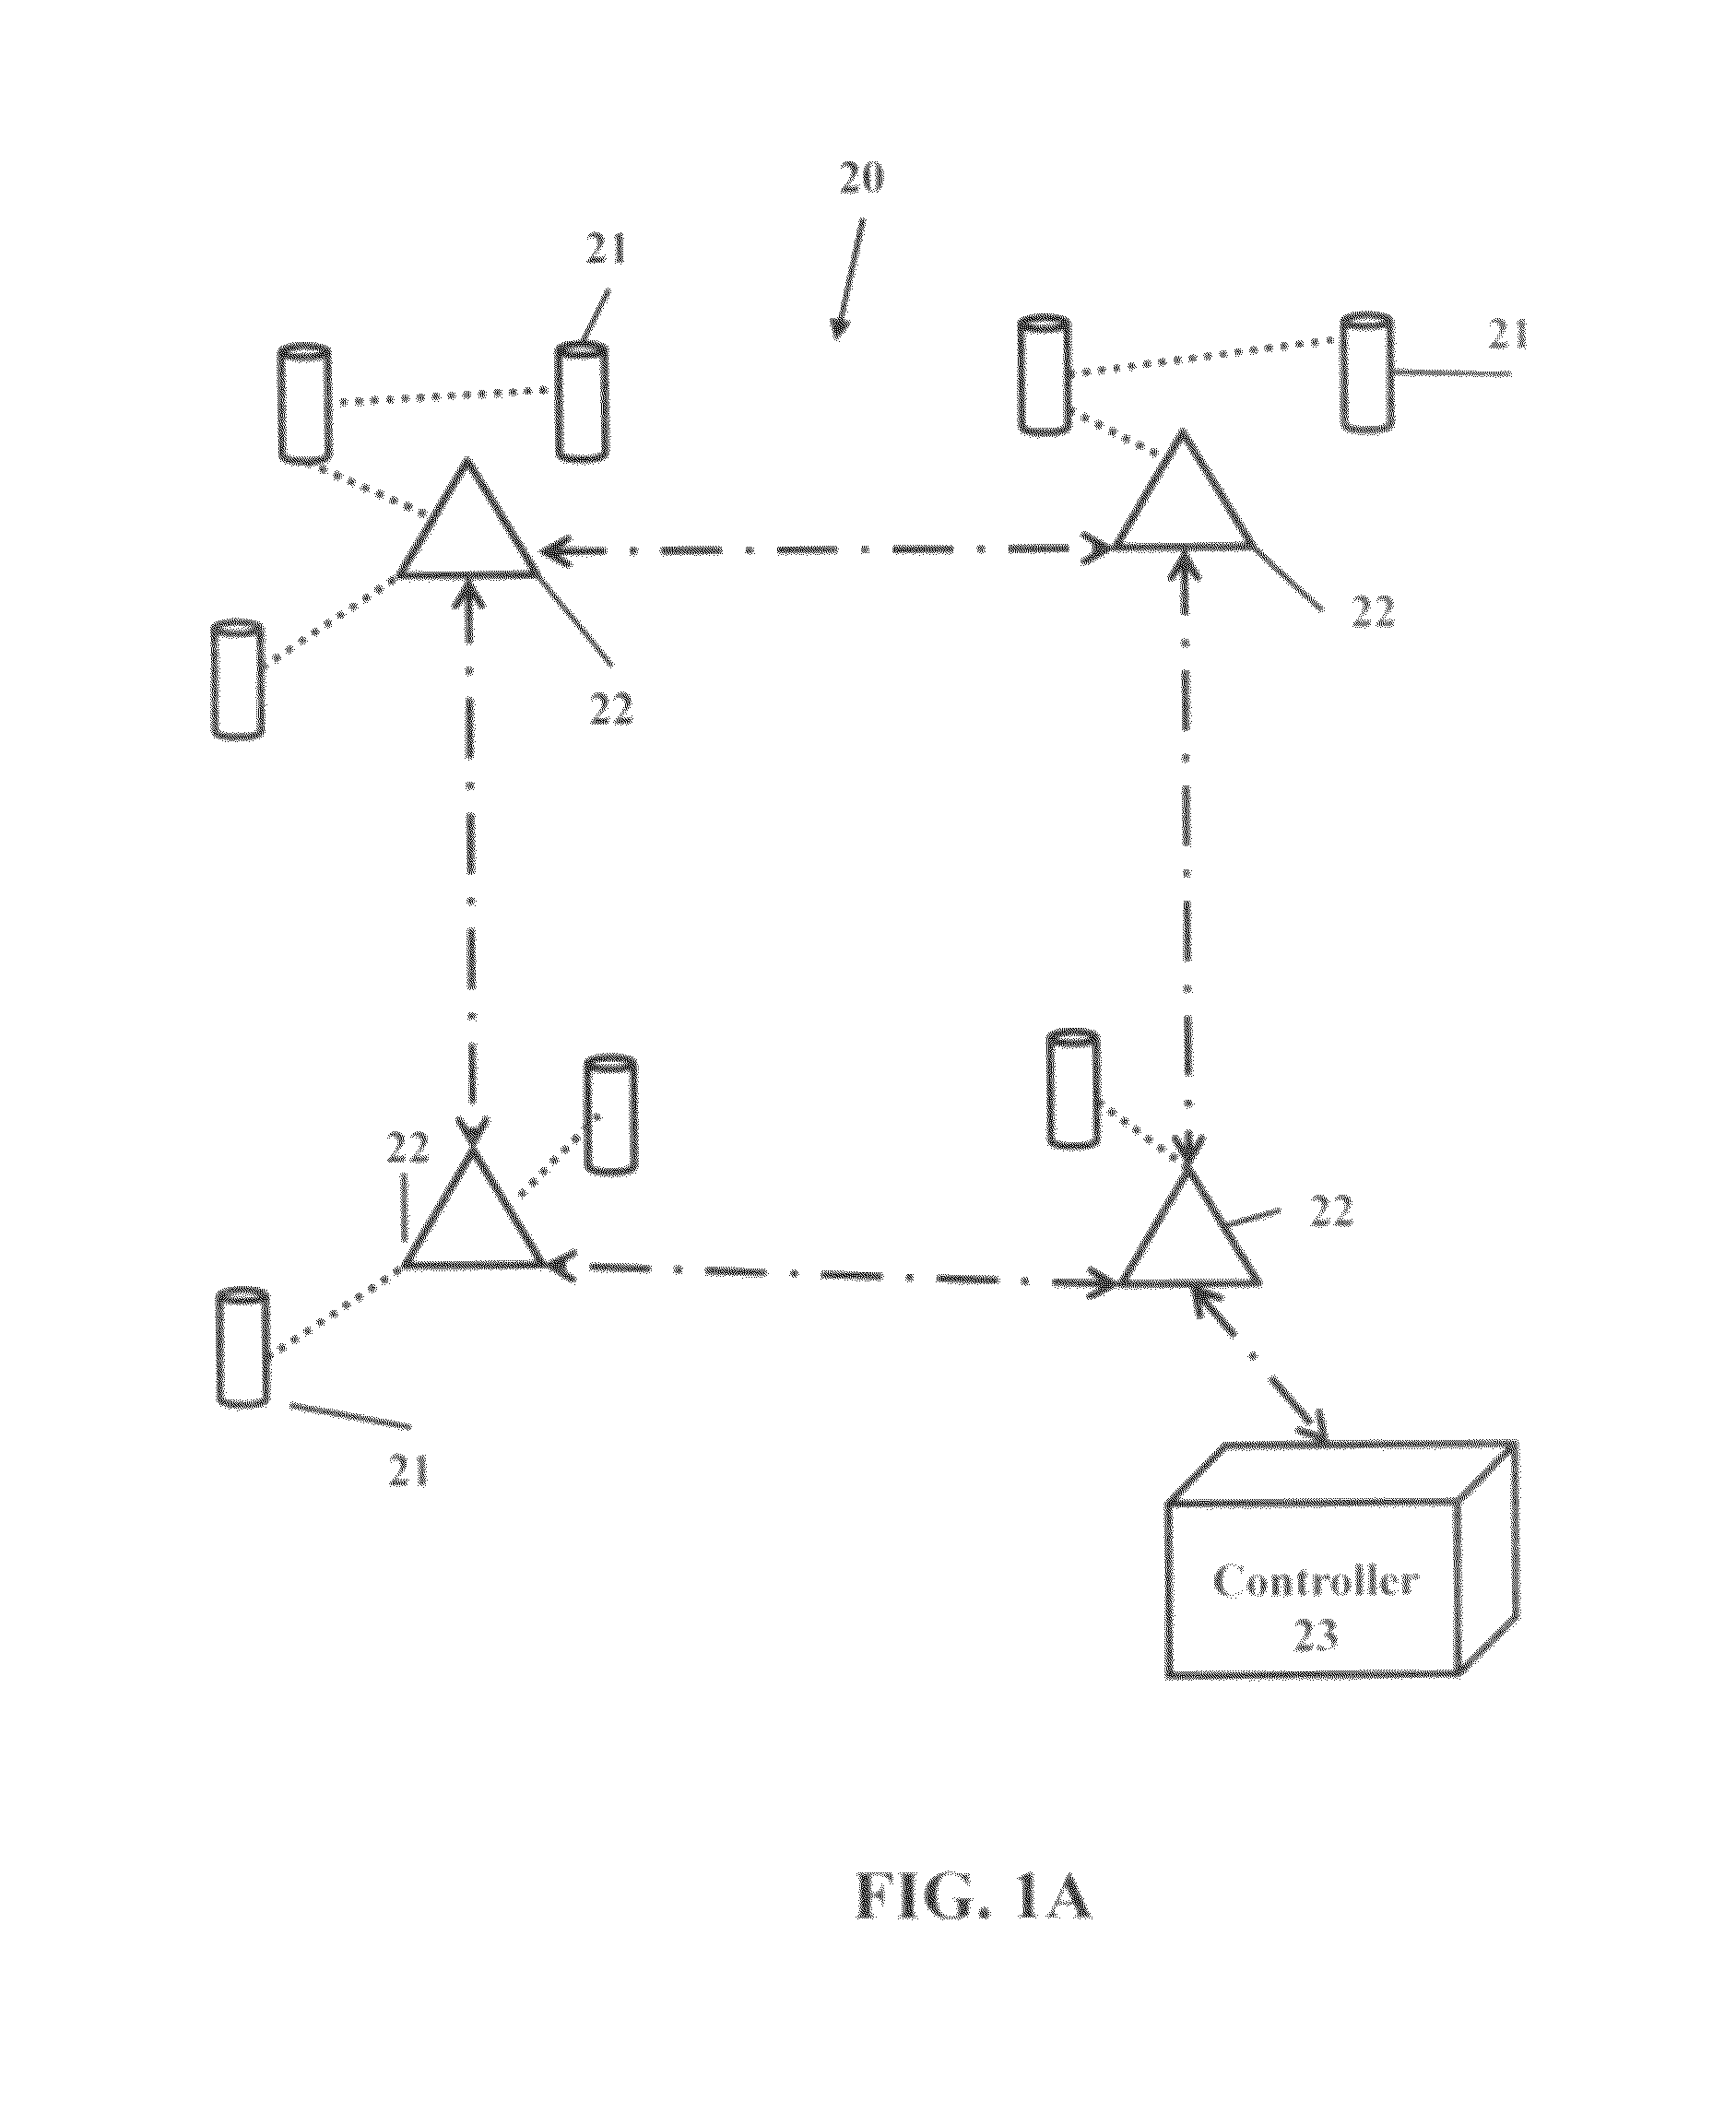 Method and system for monitoring soil and water resources